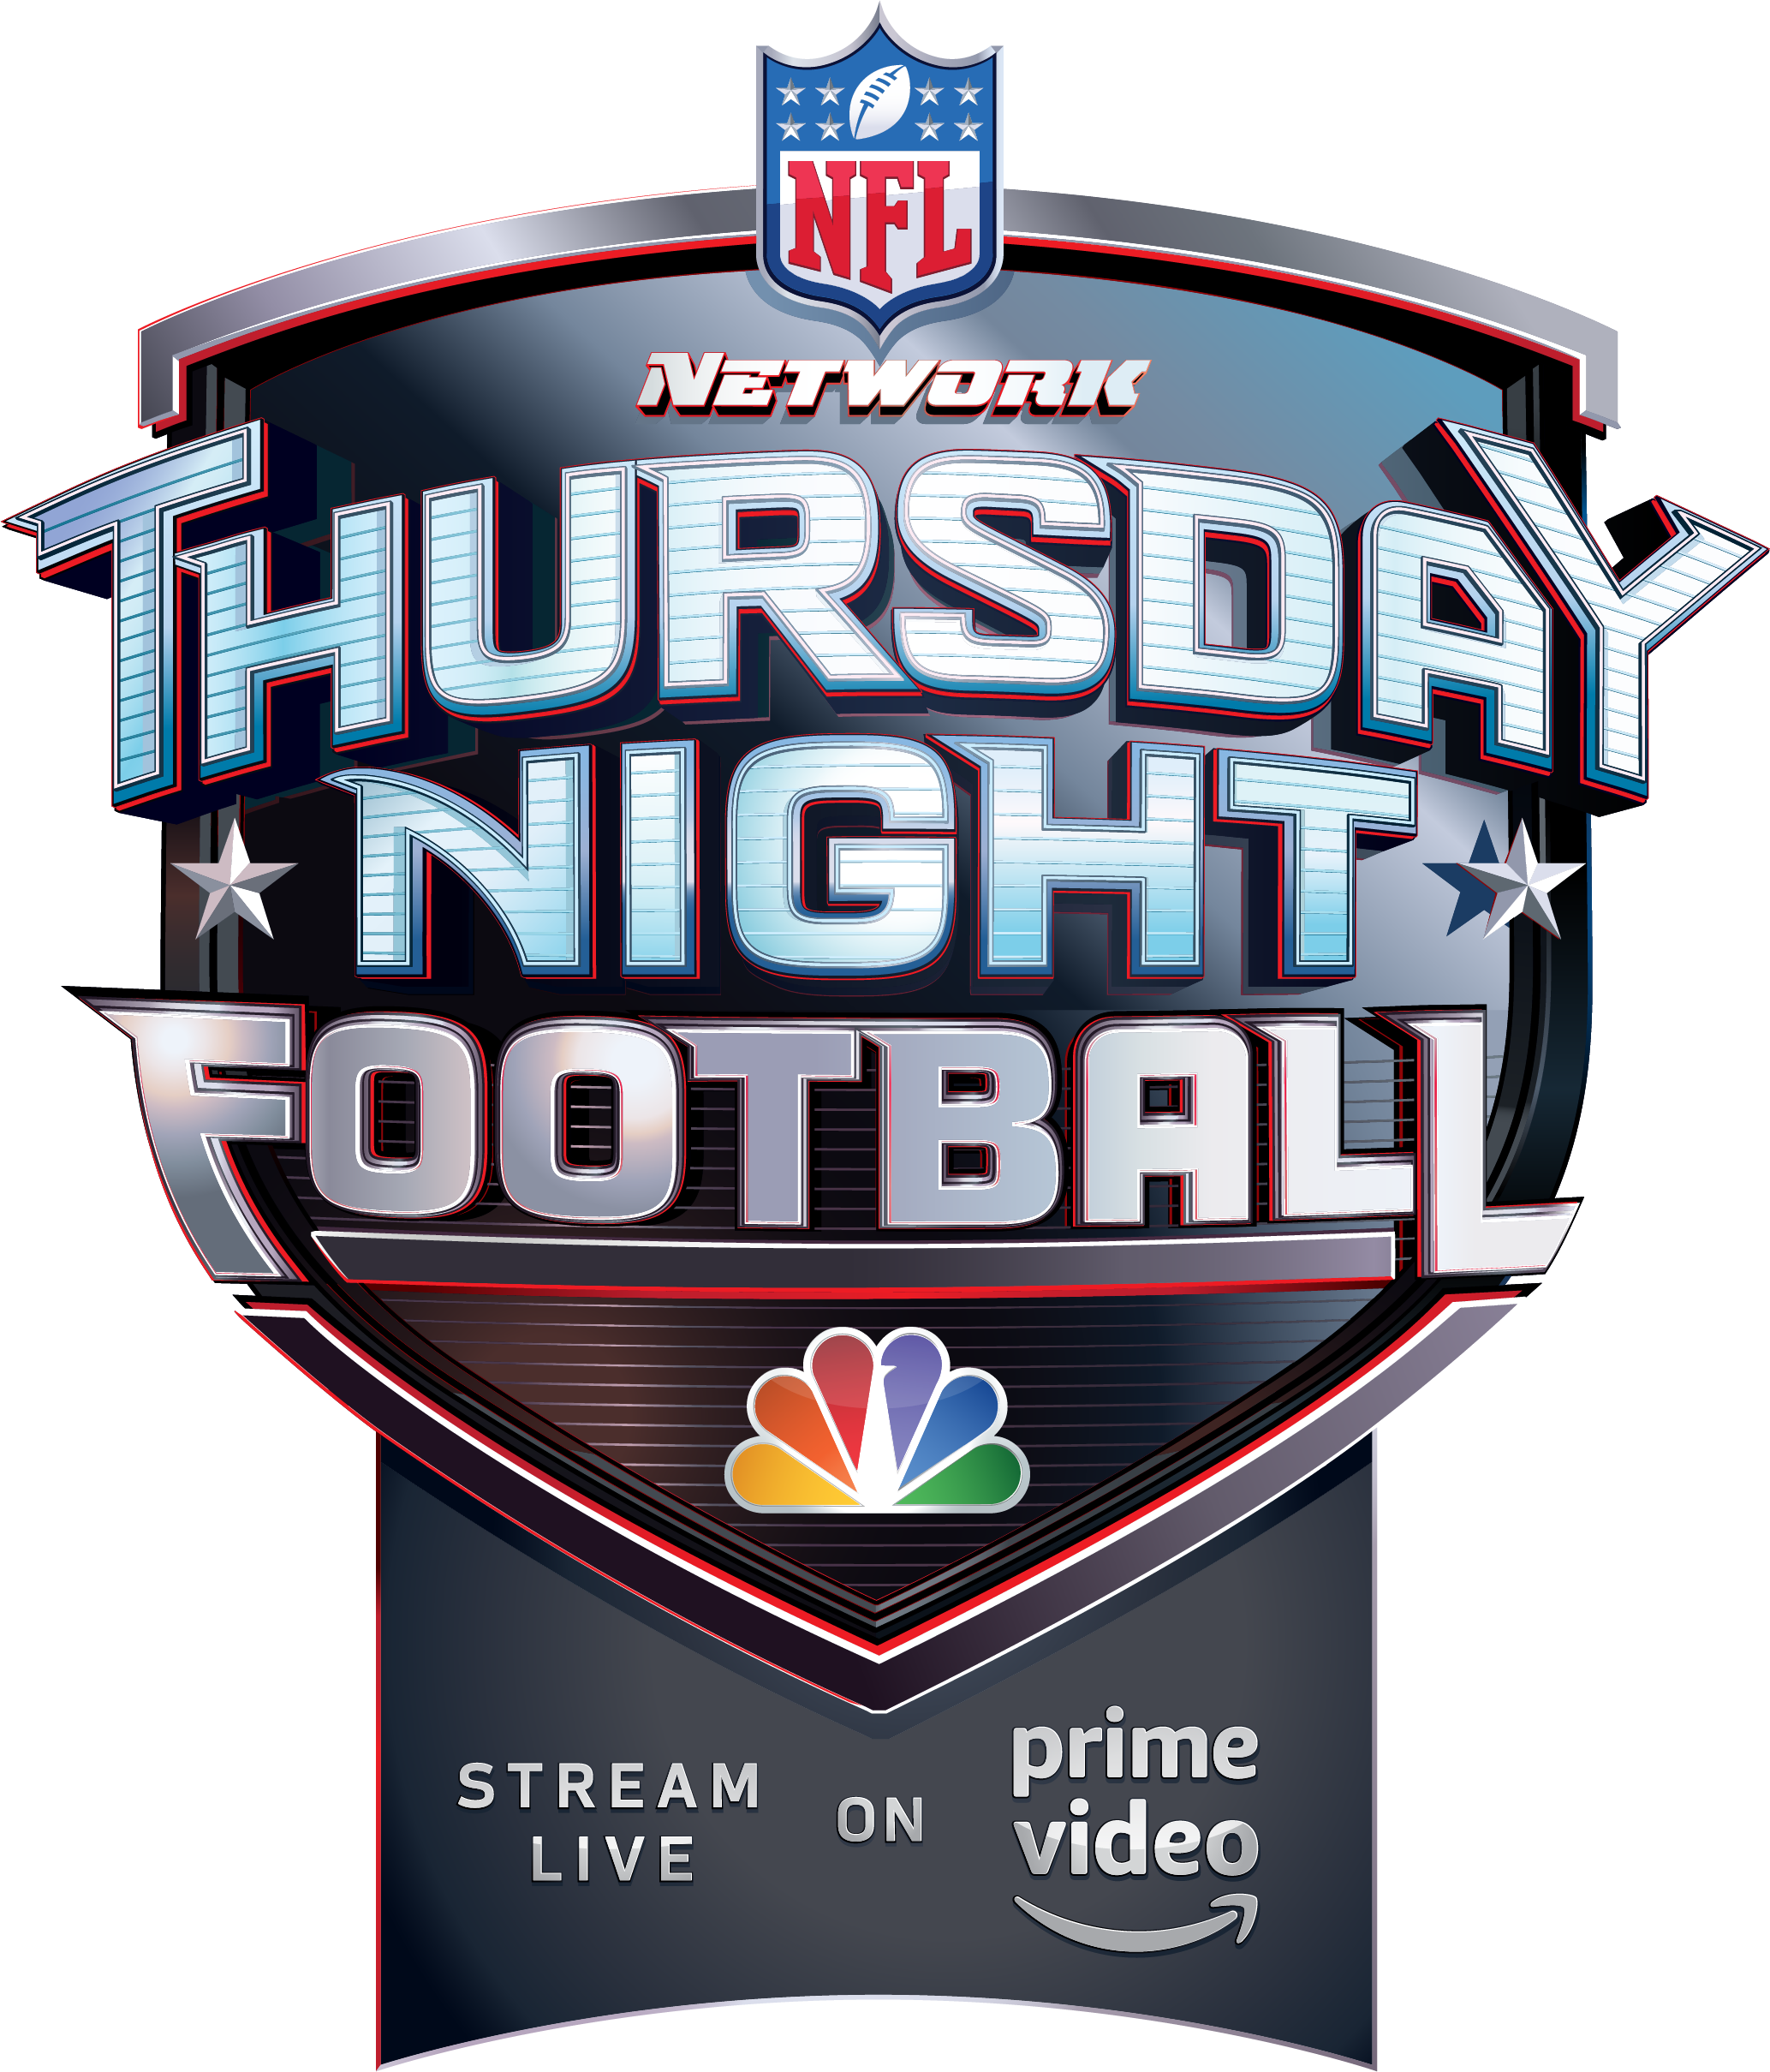 THURSDAY NIGHT FOOTBALL” ON NBC, NFL NETWORK, AMAZON PRIME VIDEO, NBC SPORTS DIGITAL and NFL DIGITAL AVERAGES 15 MILLION VIEWERS ACROSS ALL PLATFORMS